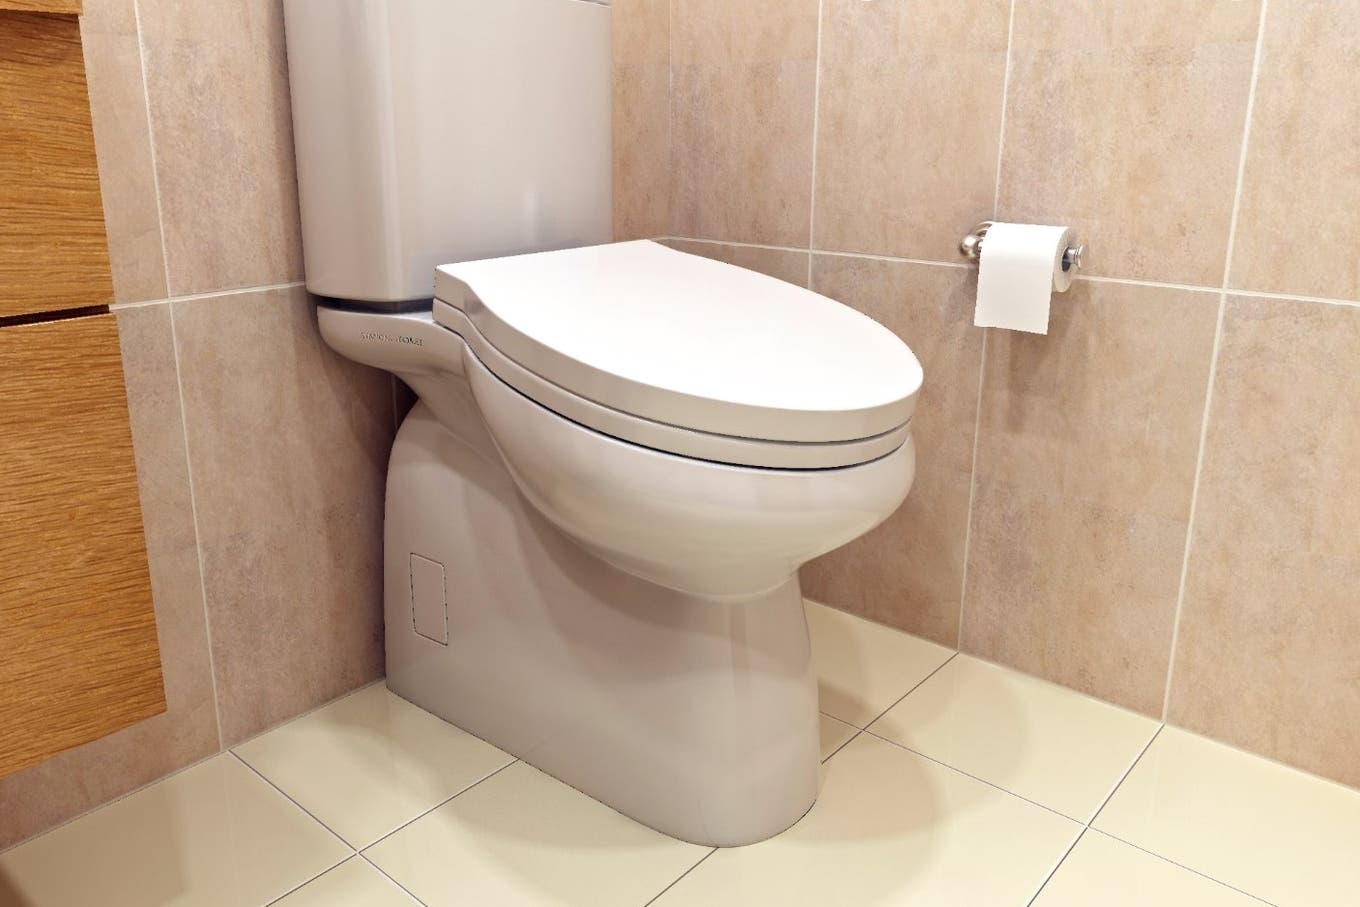 They propose to install inclined toilets in the offices so that people do not spend more than 5 minutes in the bathroom